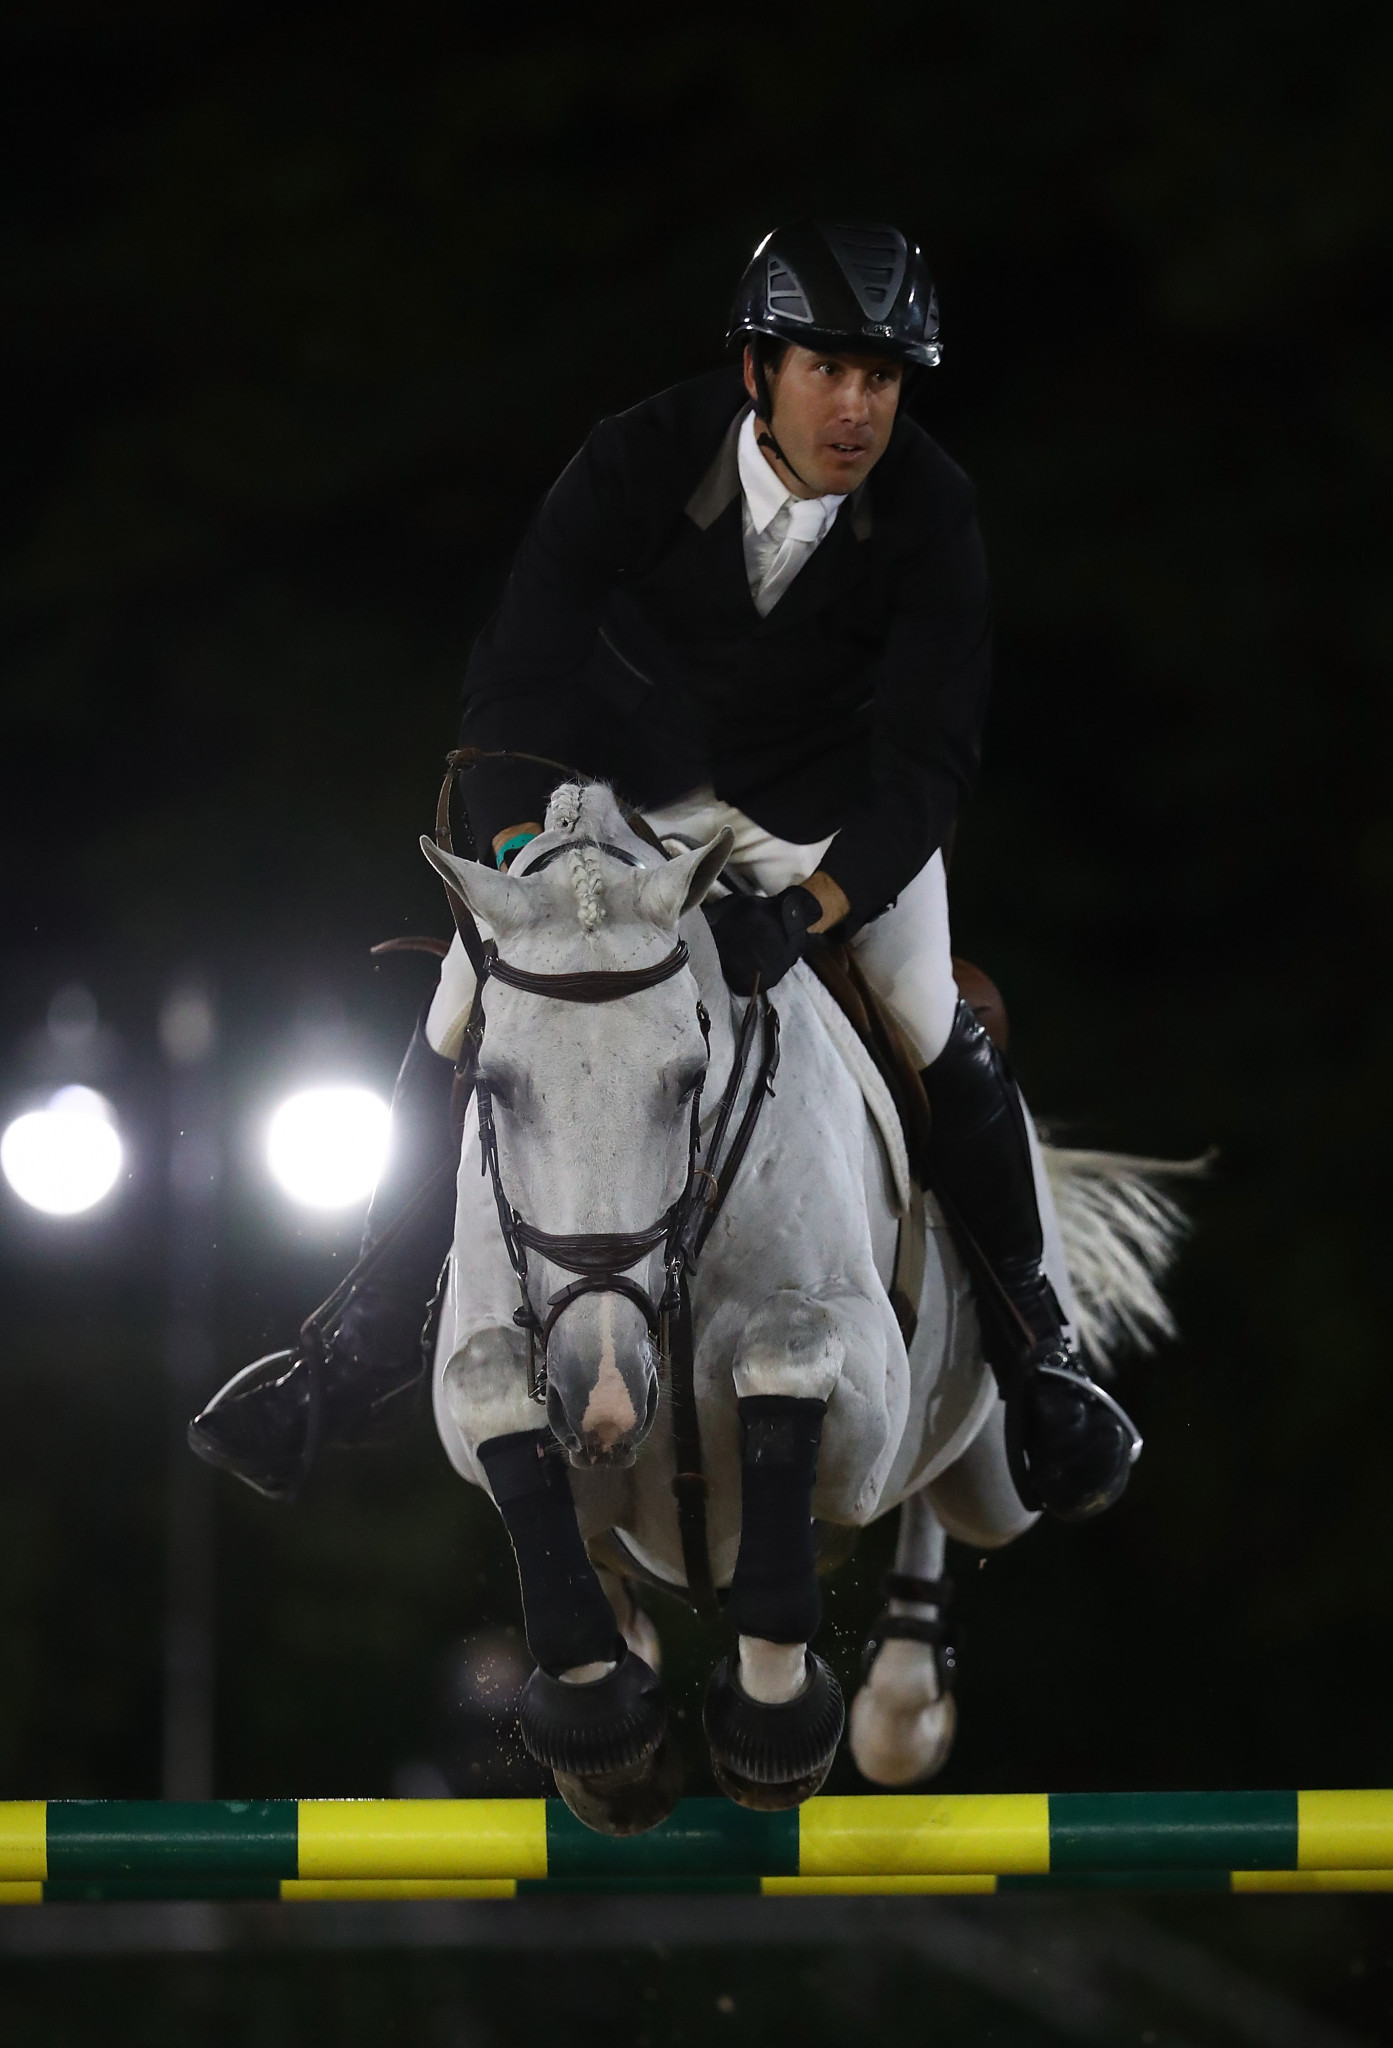 Andrew Kocher is banned from attending or competing in any FEI or National Federation event until 2030 ©Getty Images